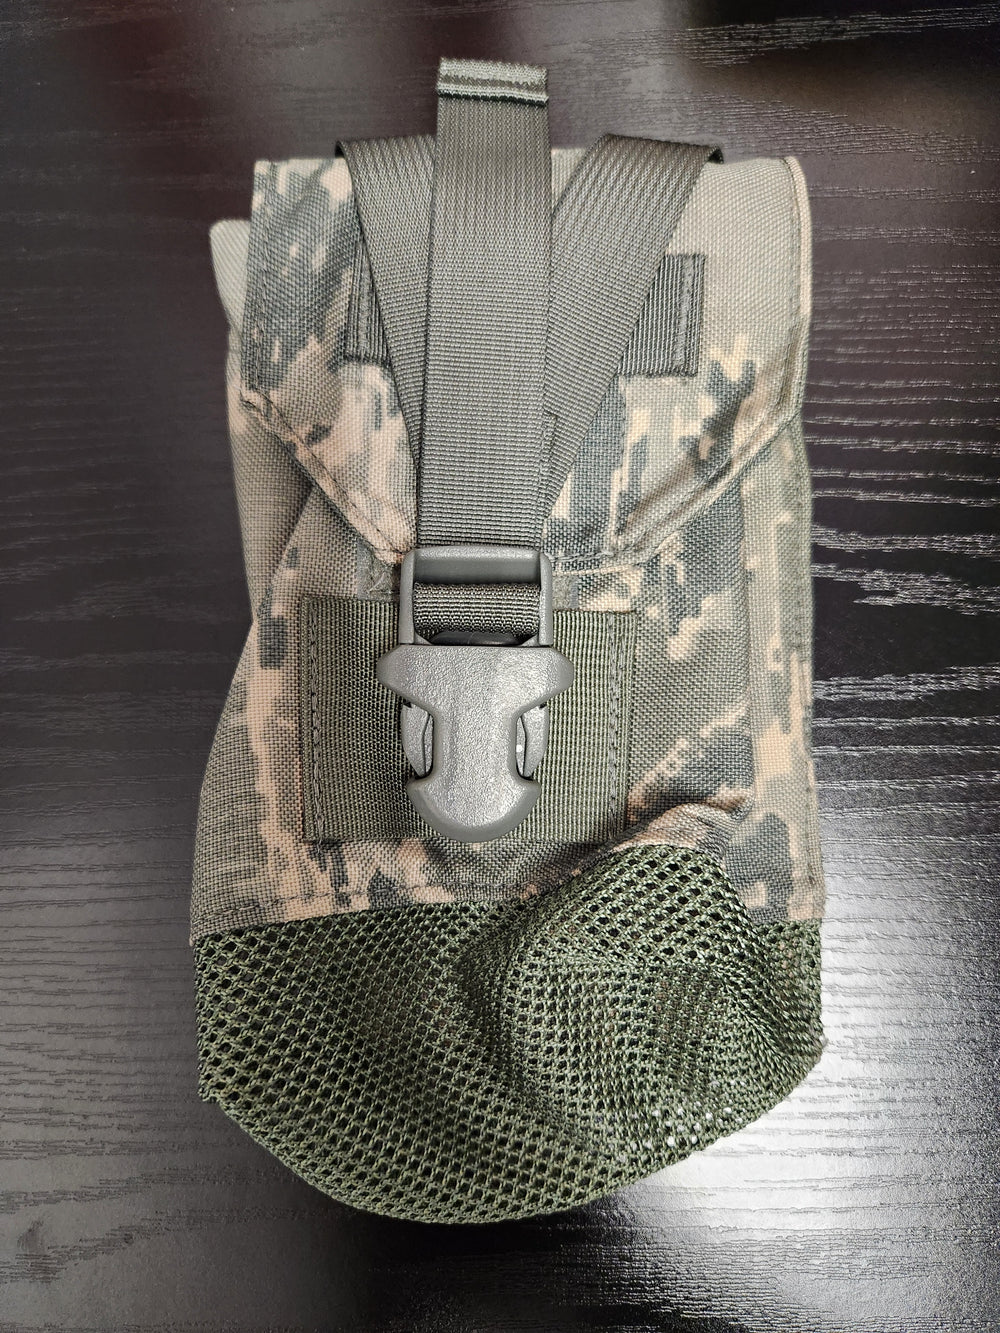 U.S. Military Surplus Canteen/General Purpose Pouch - NEW